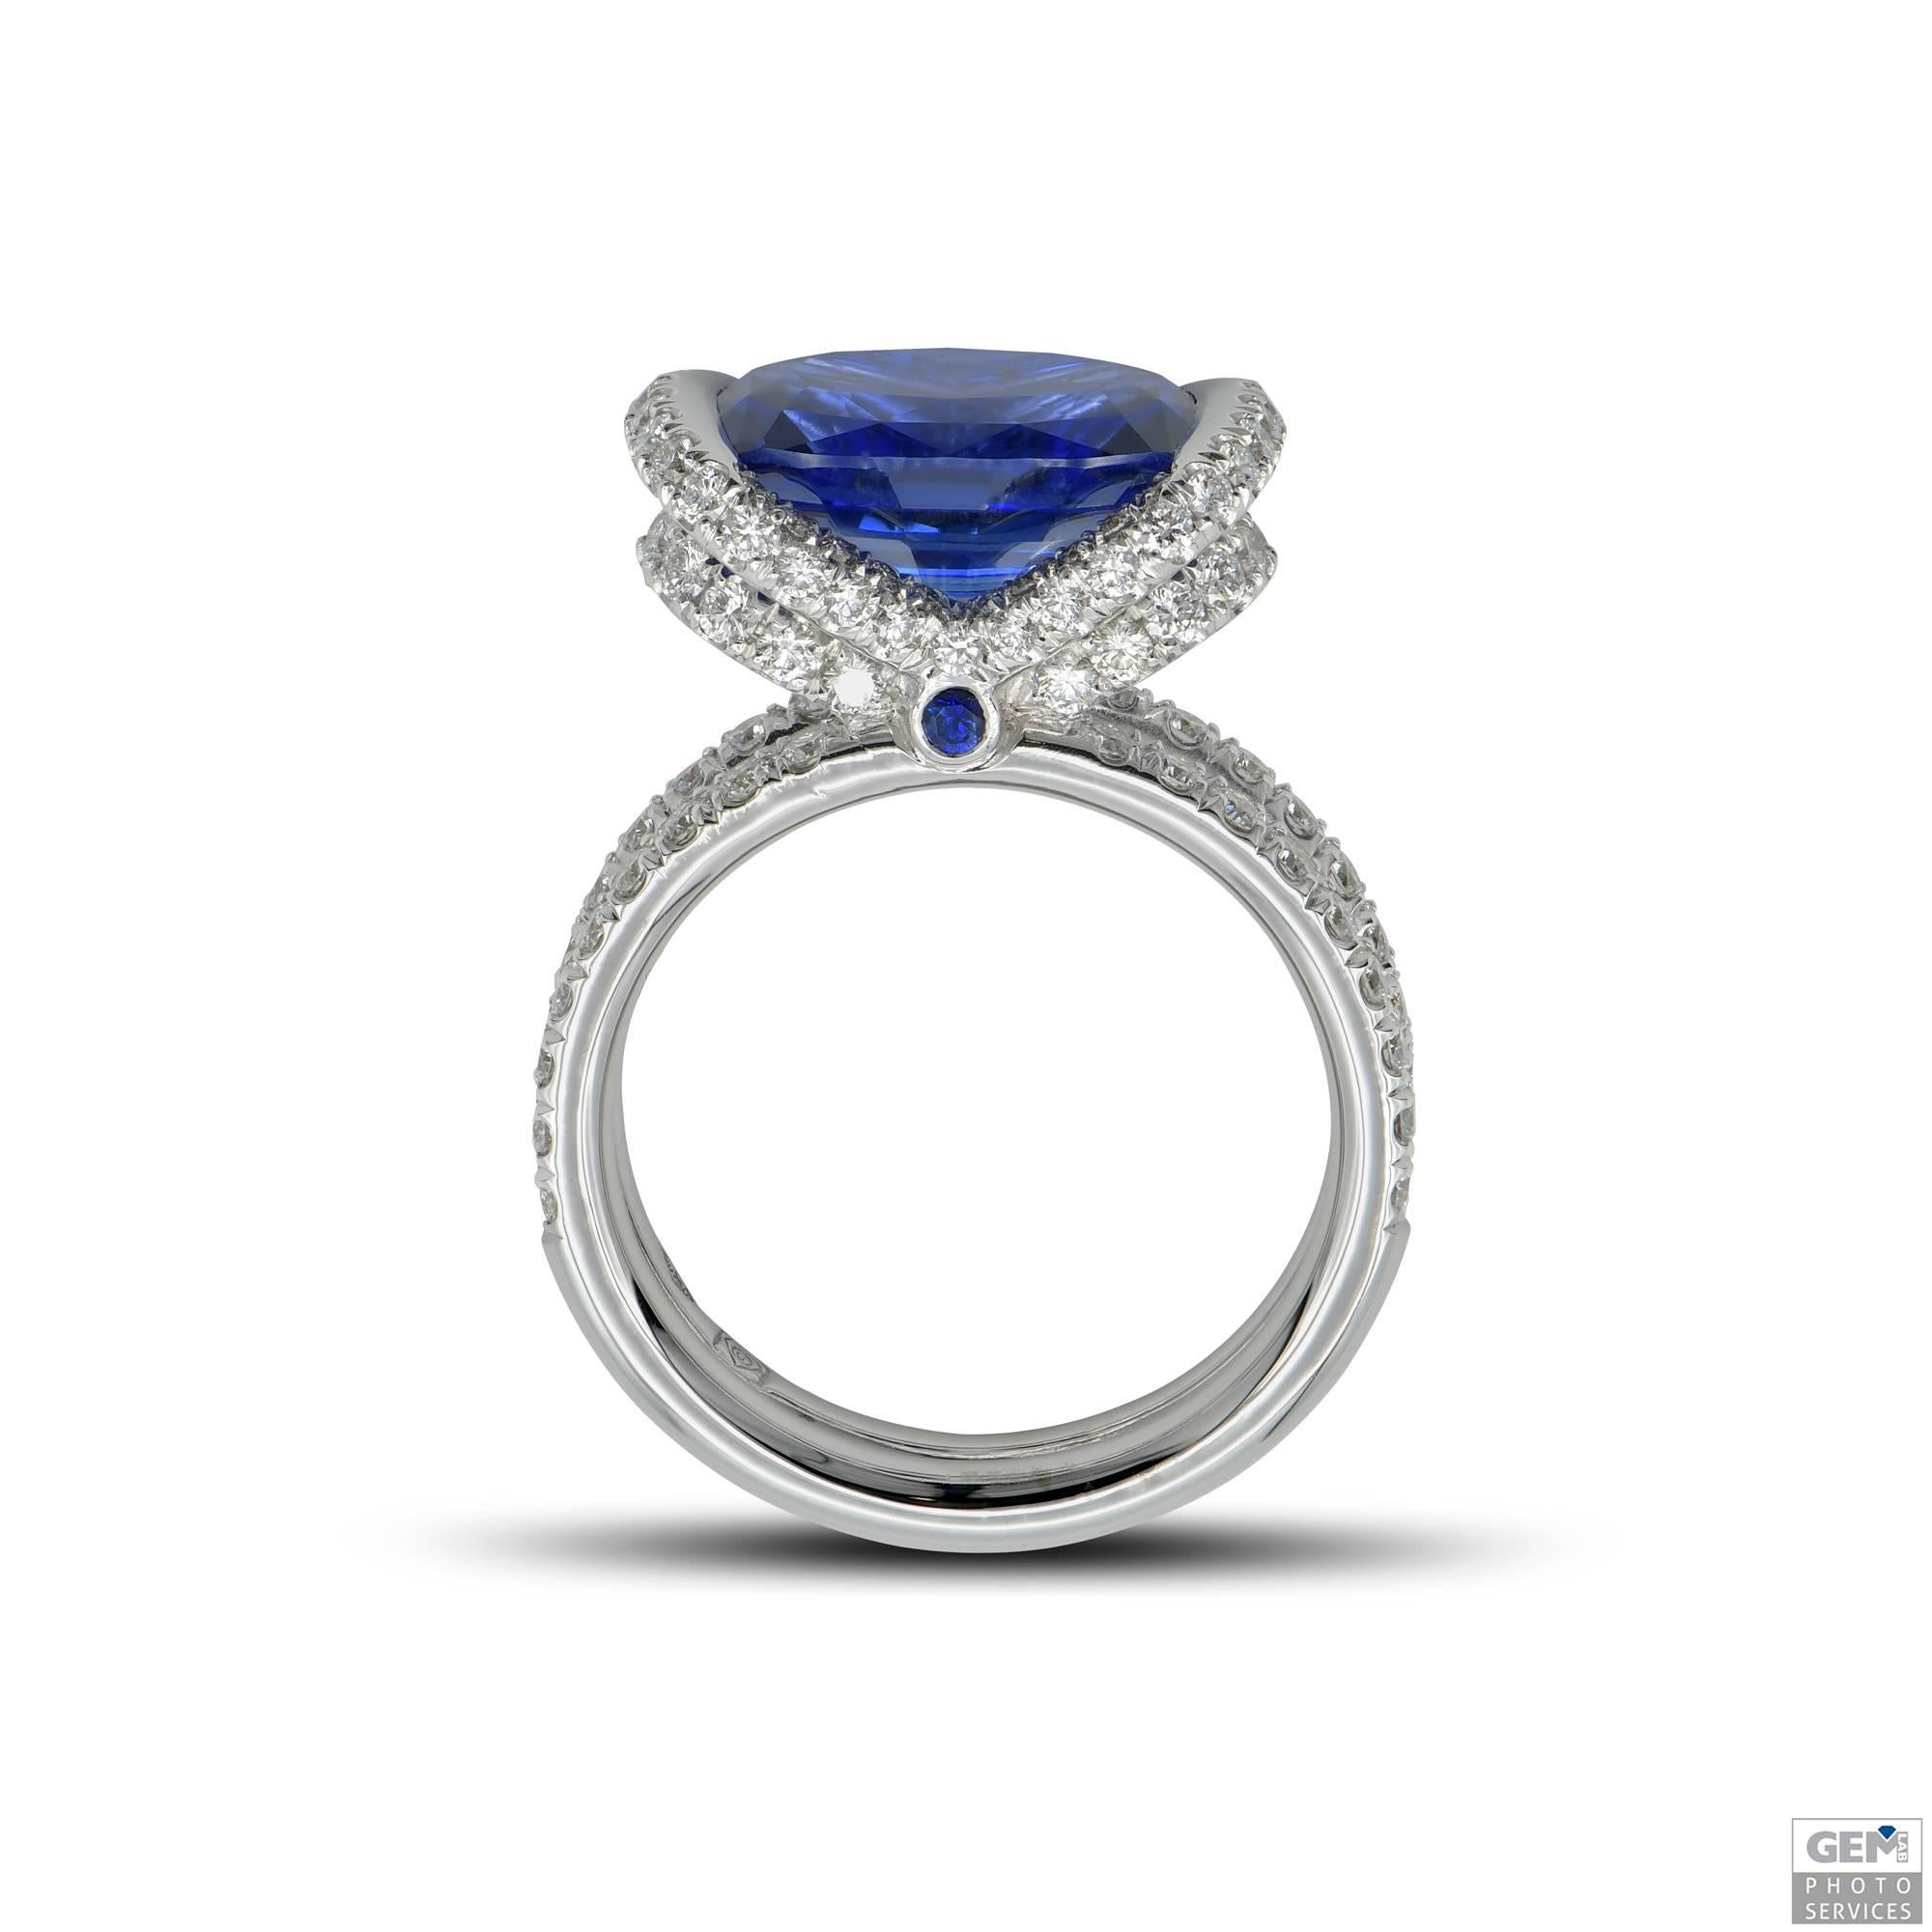 A unique sapphire cocktail ring, designed around a 5,58 carat vivid blue cushion sapphire. The sapphire is full of life and color, and is really a splendid stone. The origin of the sapphire is traced back to Sri Lanka.

The ring has been designed